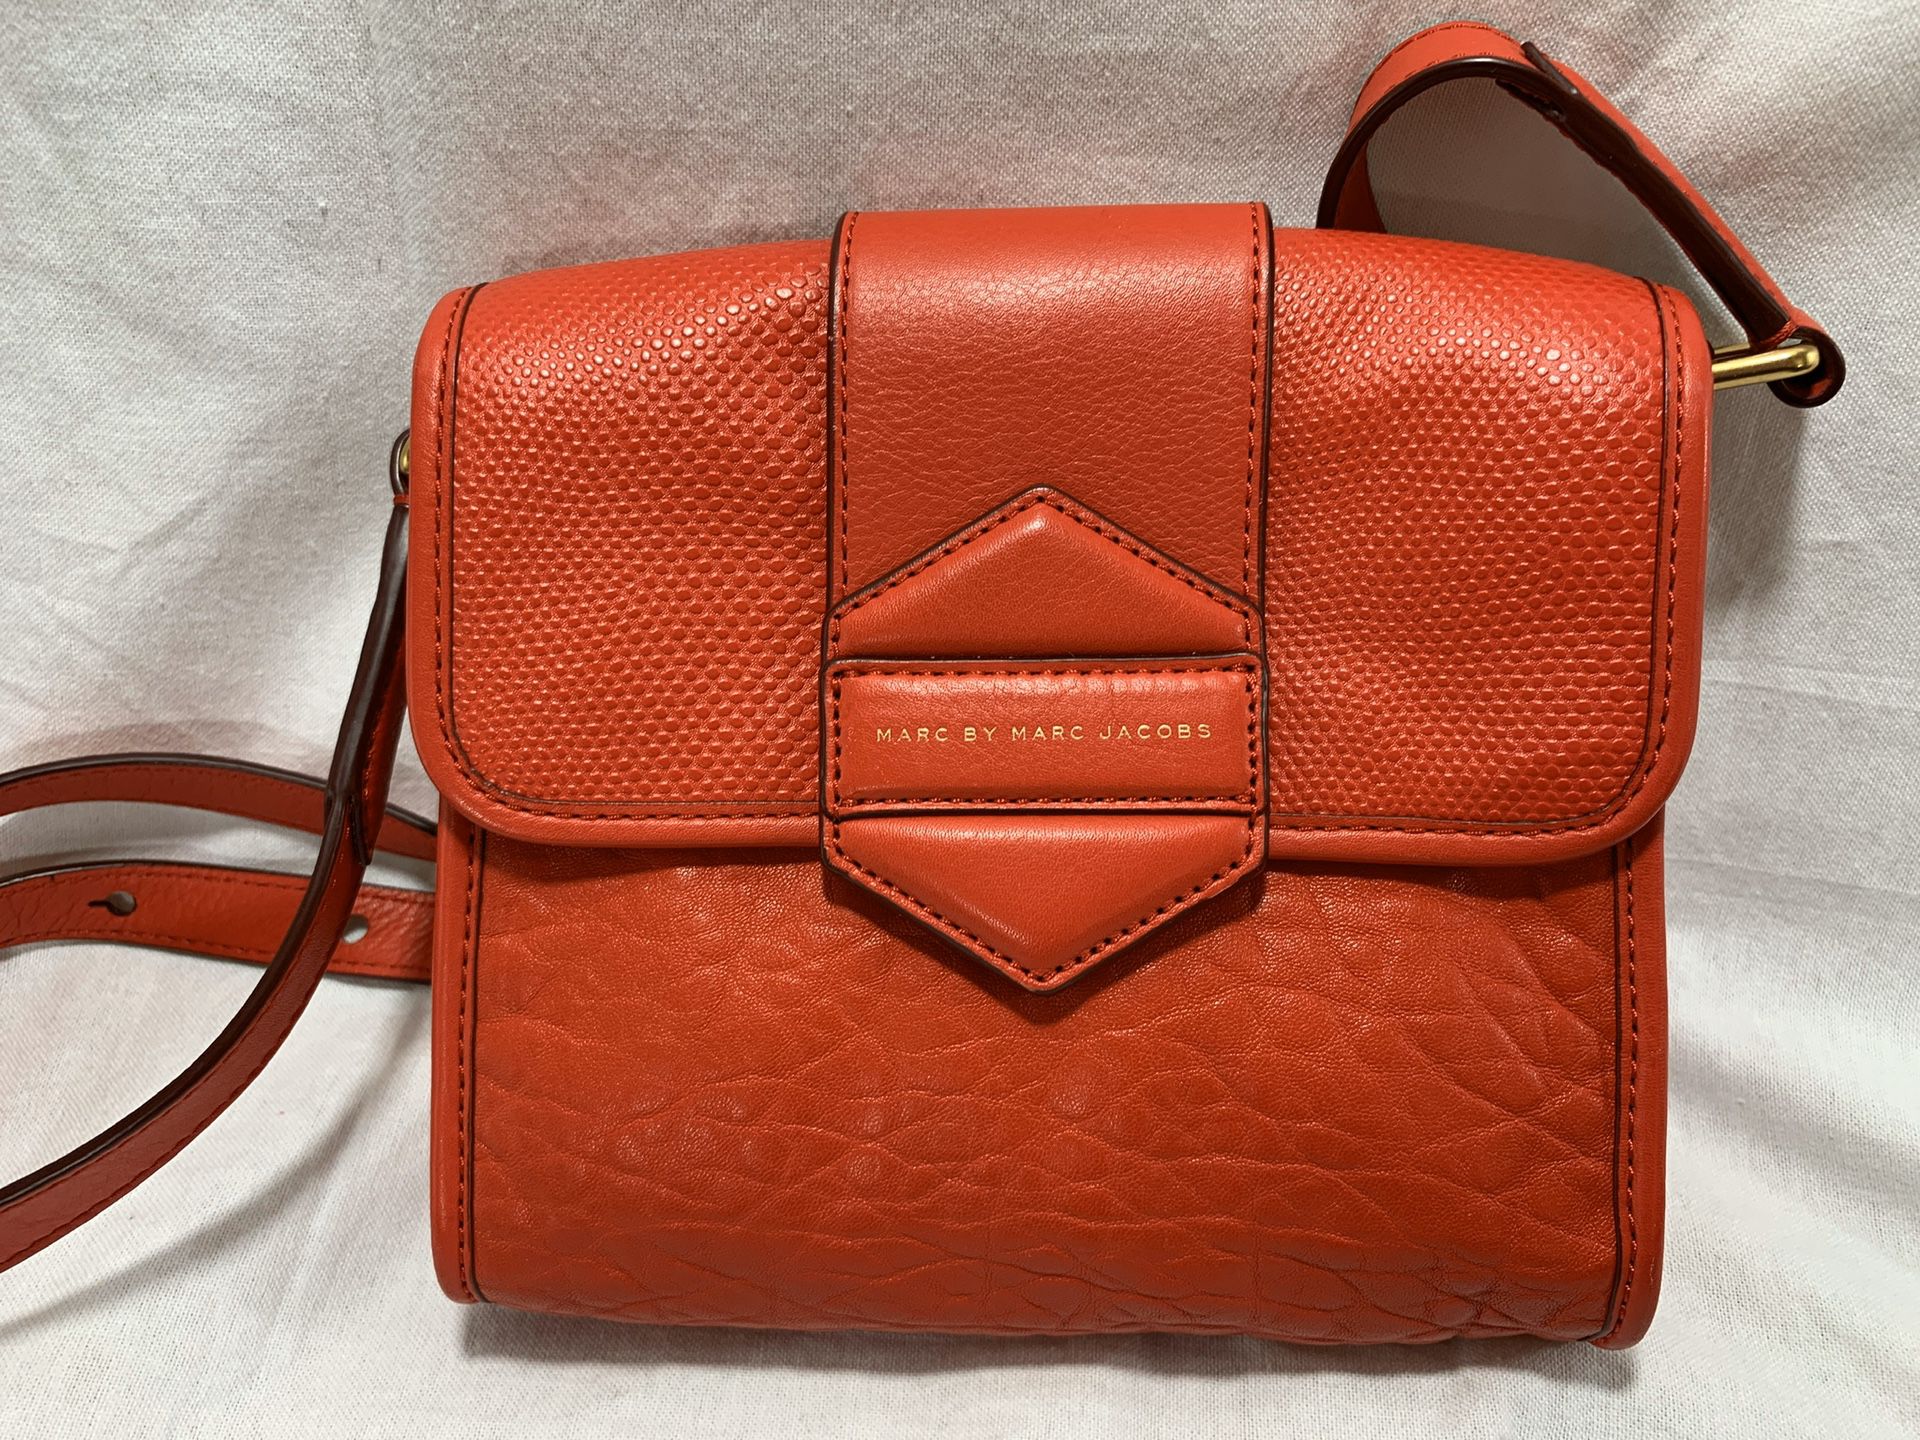 MARC JACOBS Flipping Out Messenger CrossBody Brass Cambridge Red RARE $328 *NEW*